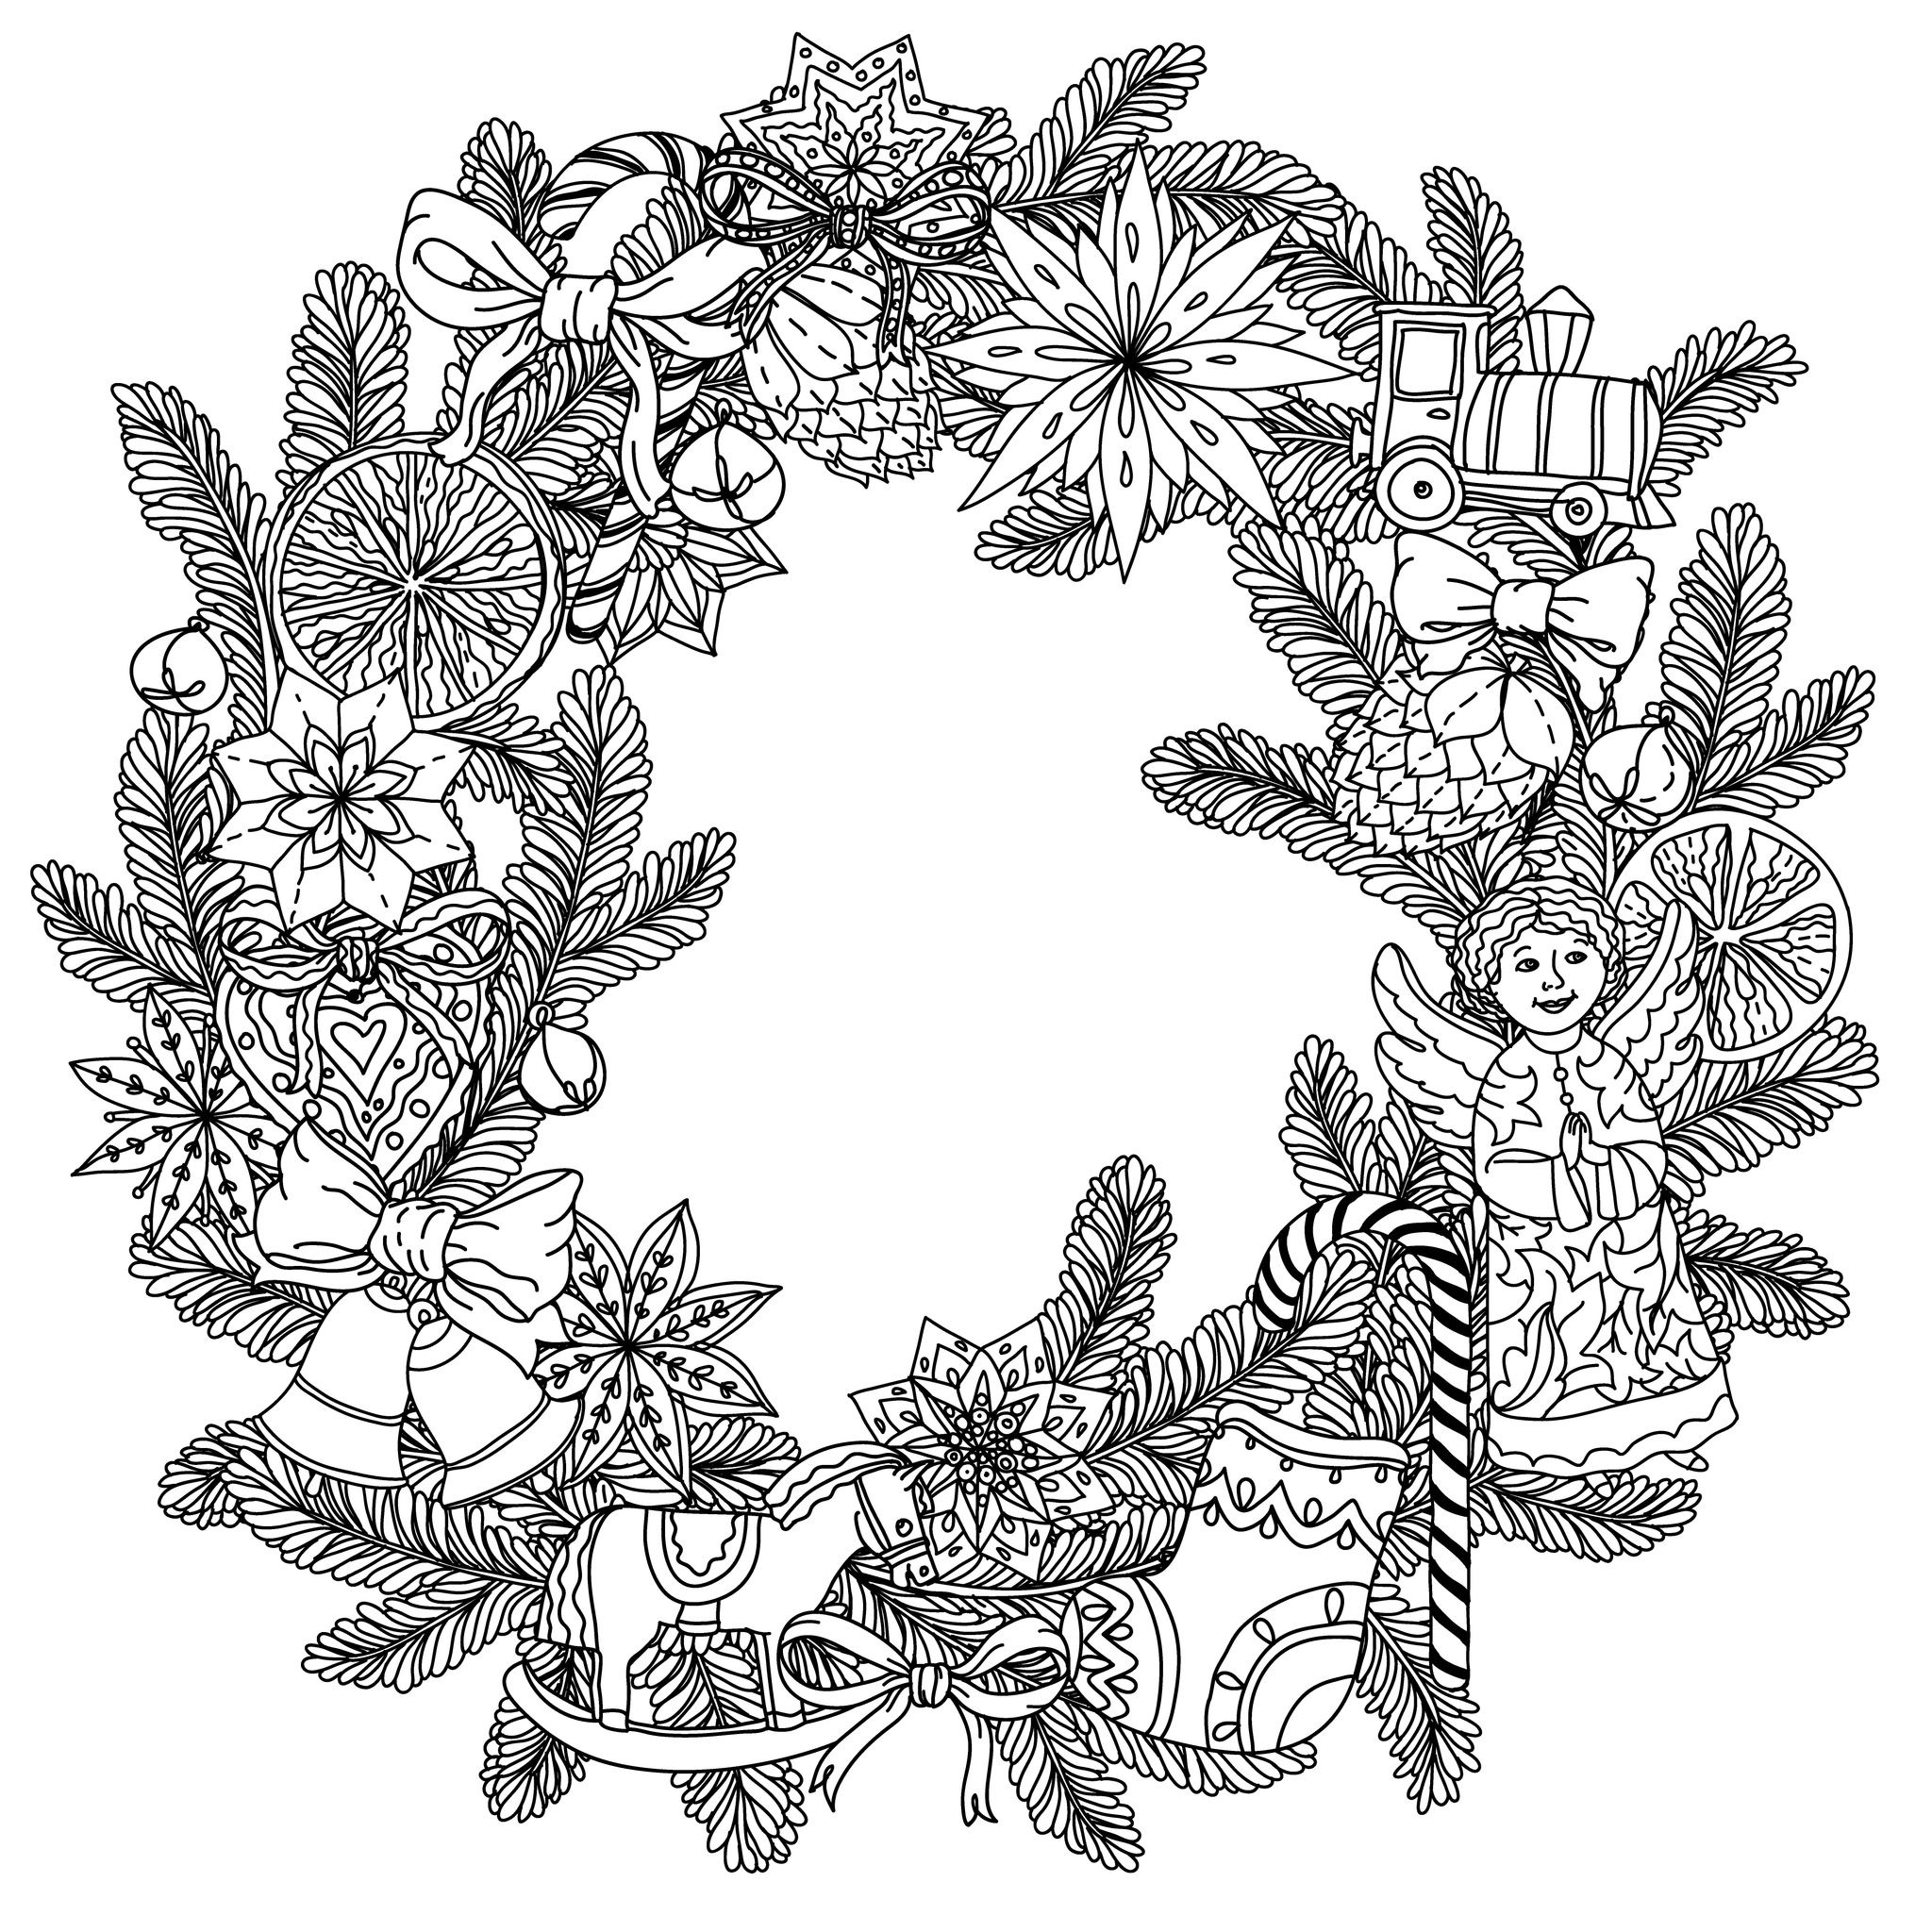 49525223 - christmas wreath with decorative items, black and white. the best for your design, textiles, posters, coloring book